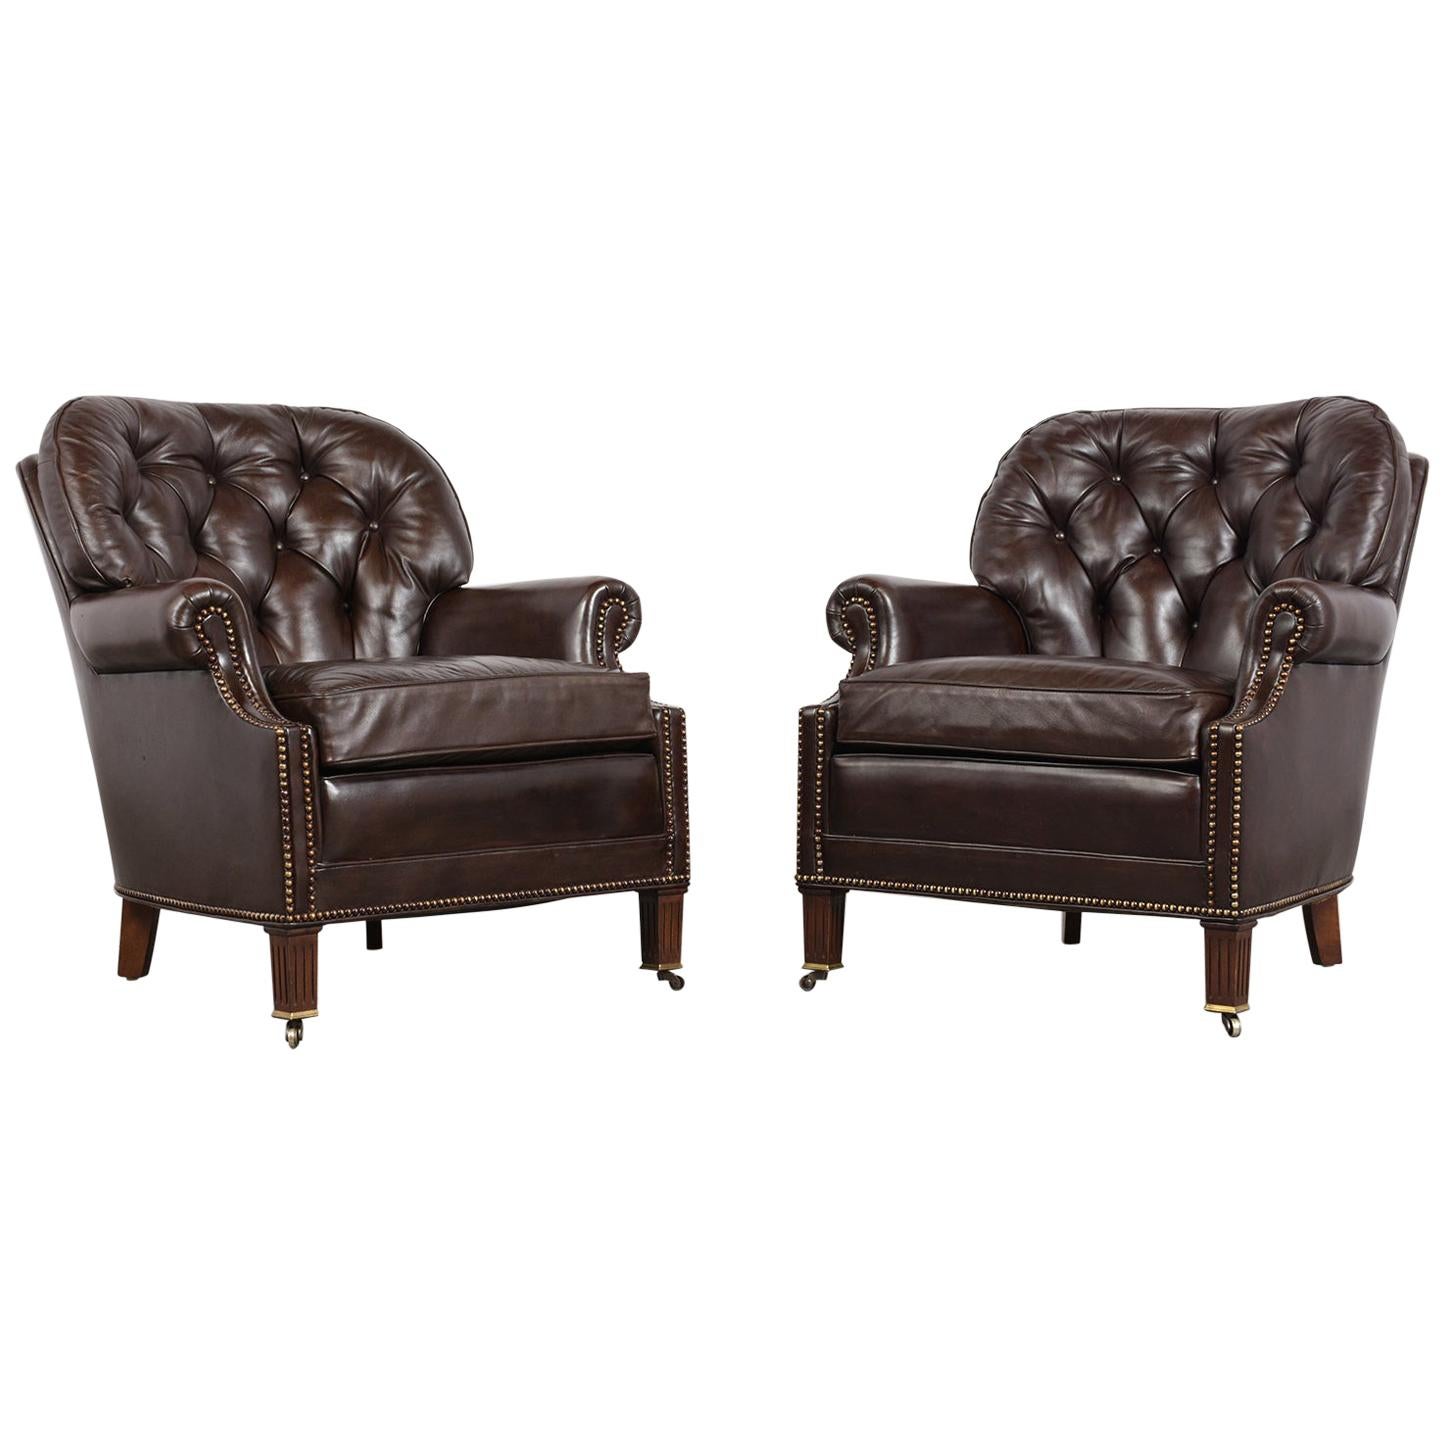 Pair of Tufted Regency Style Leather Club Chairs